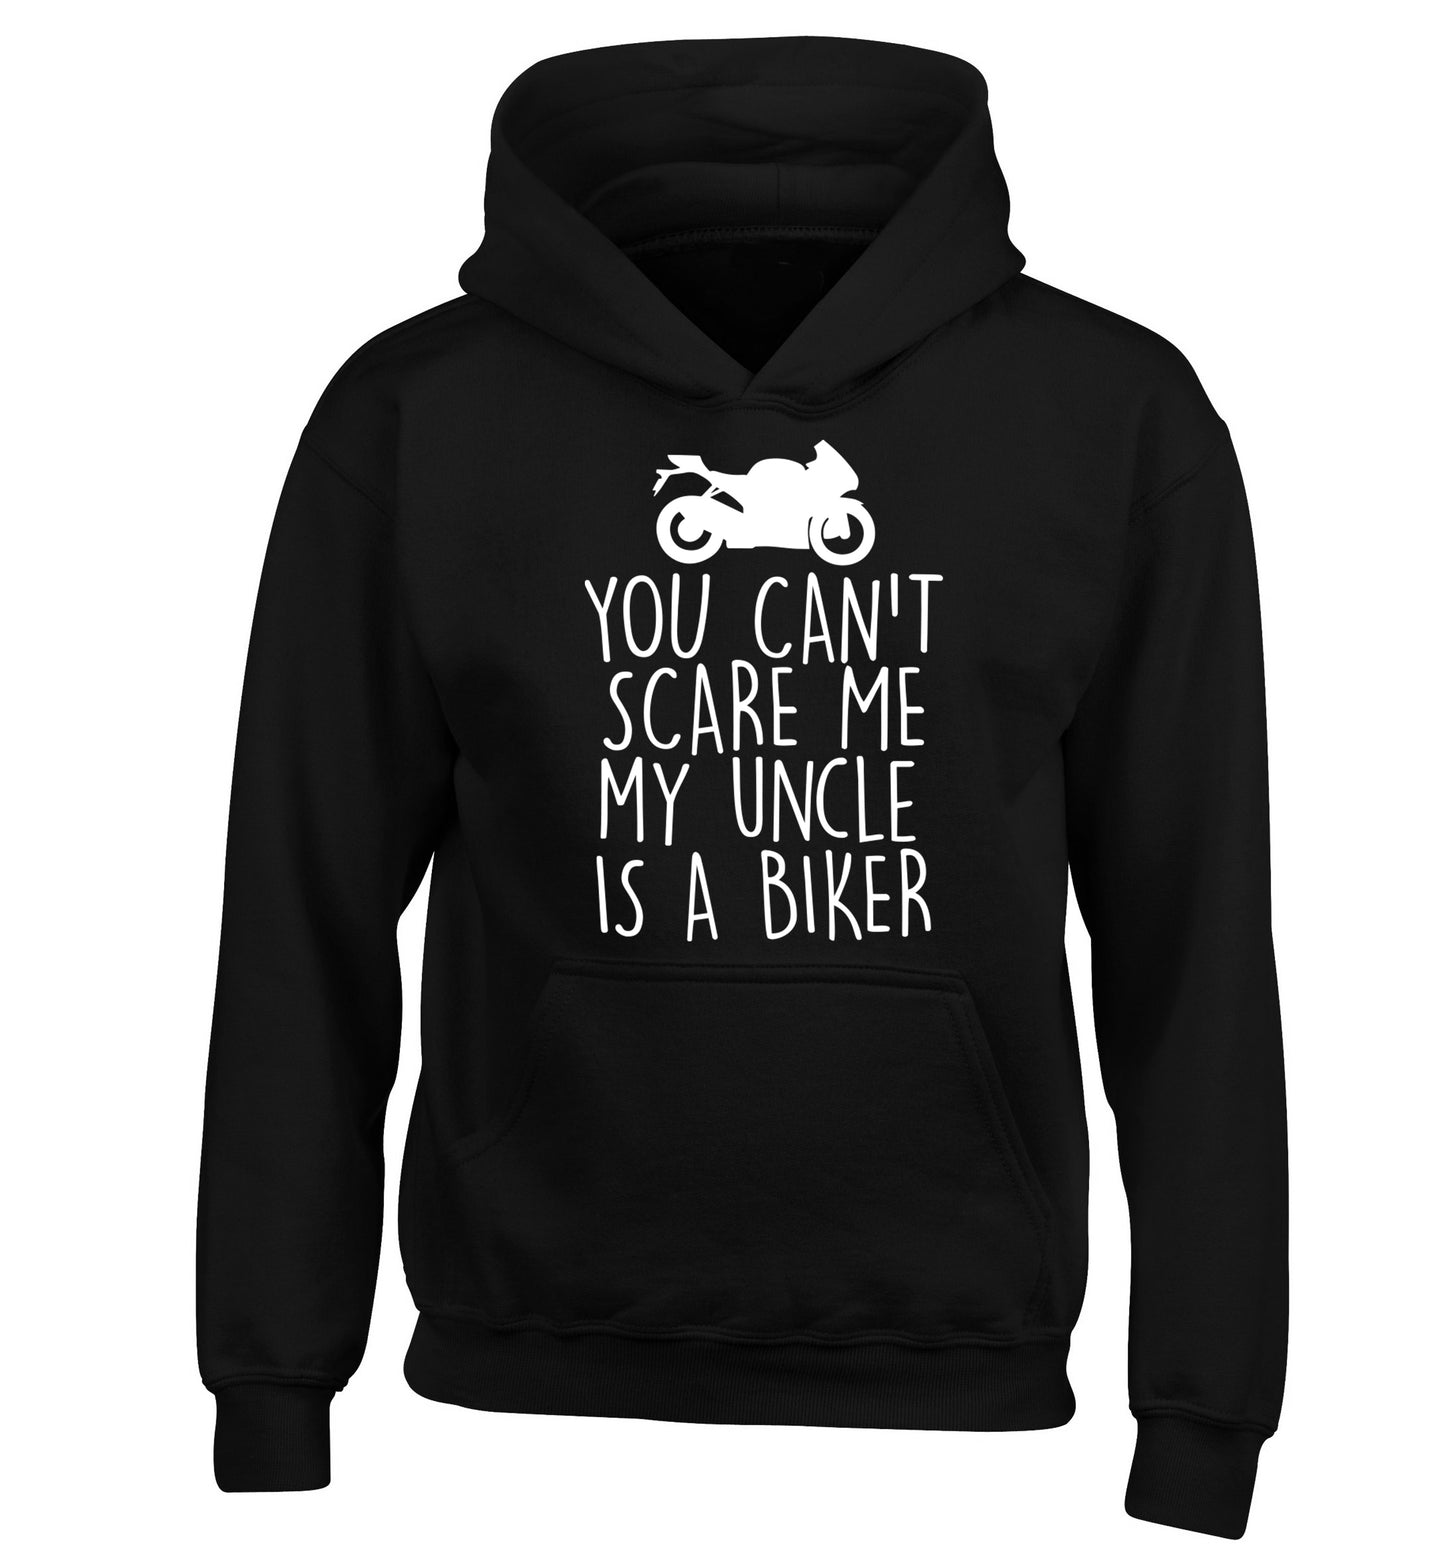 You can't scare me my uncle is a biker children's black hoodie 12-13 Years